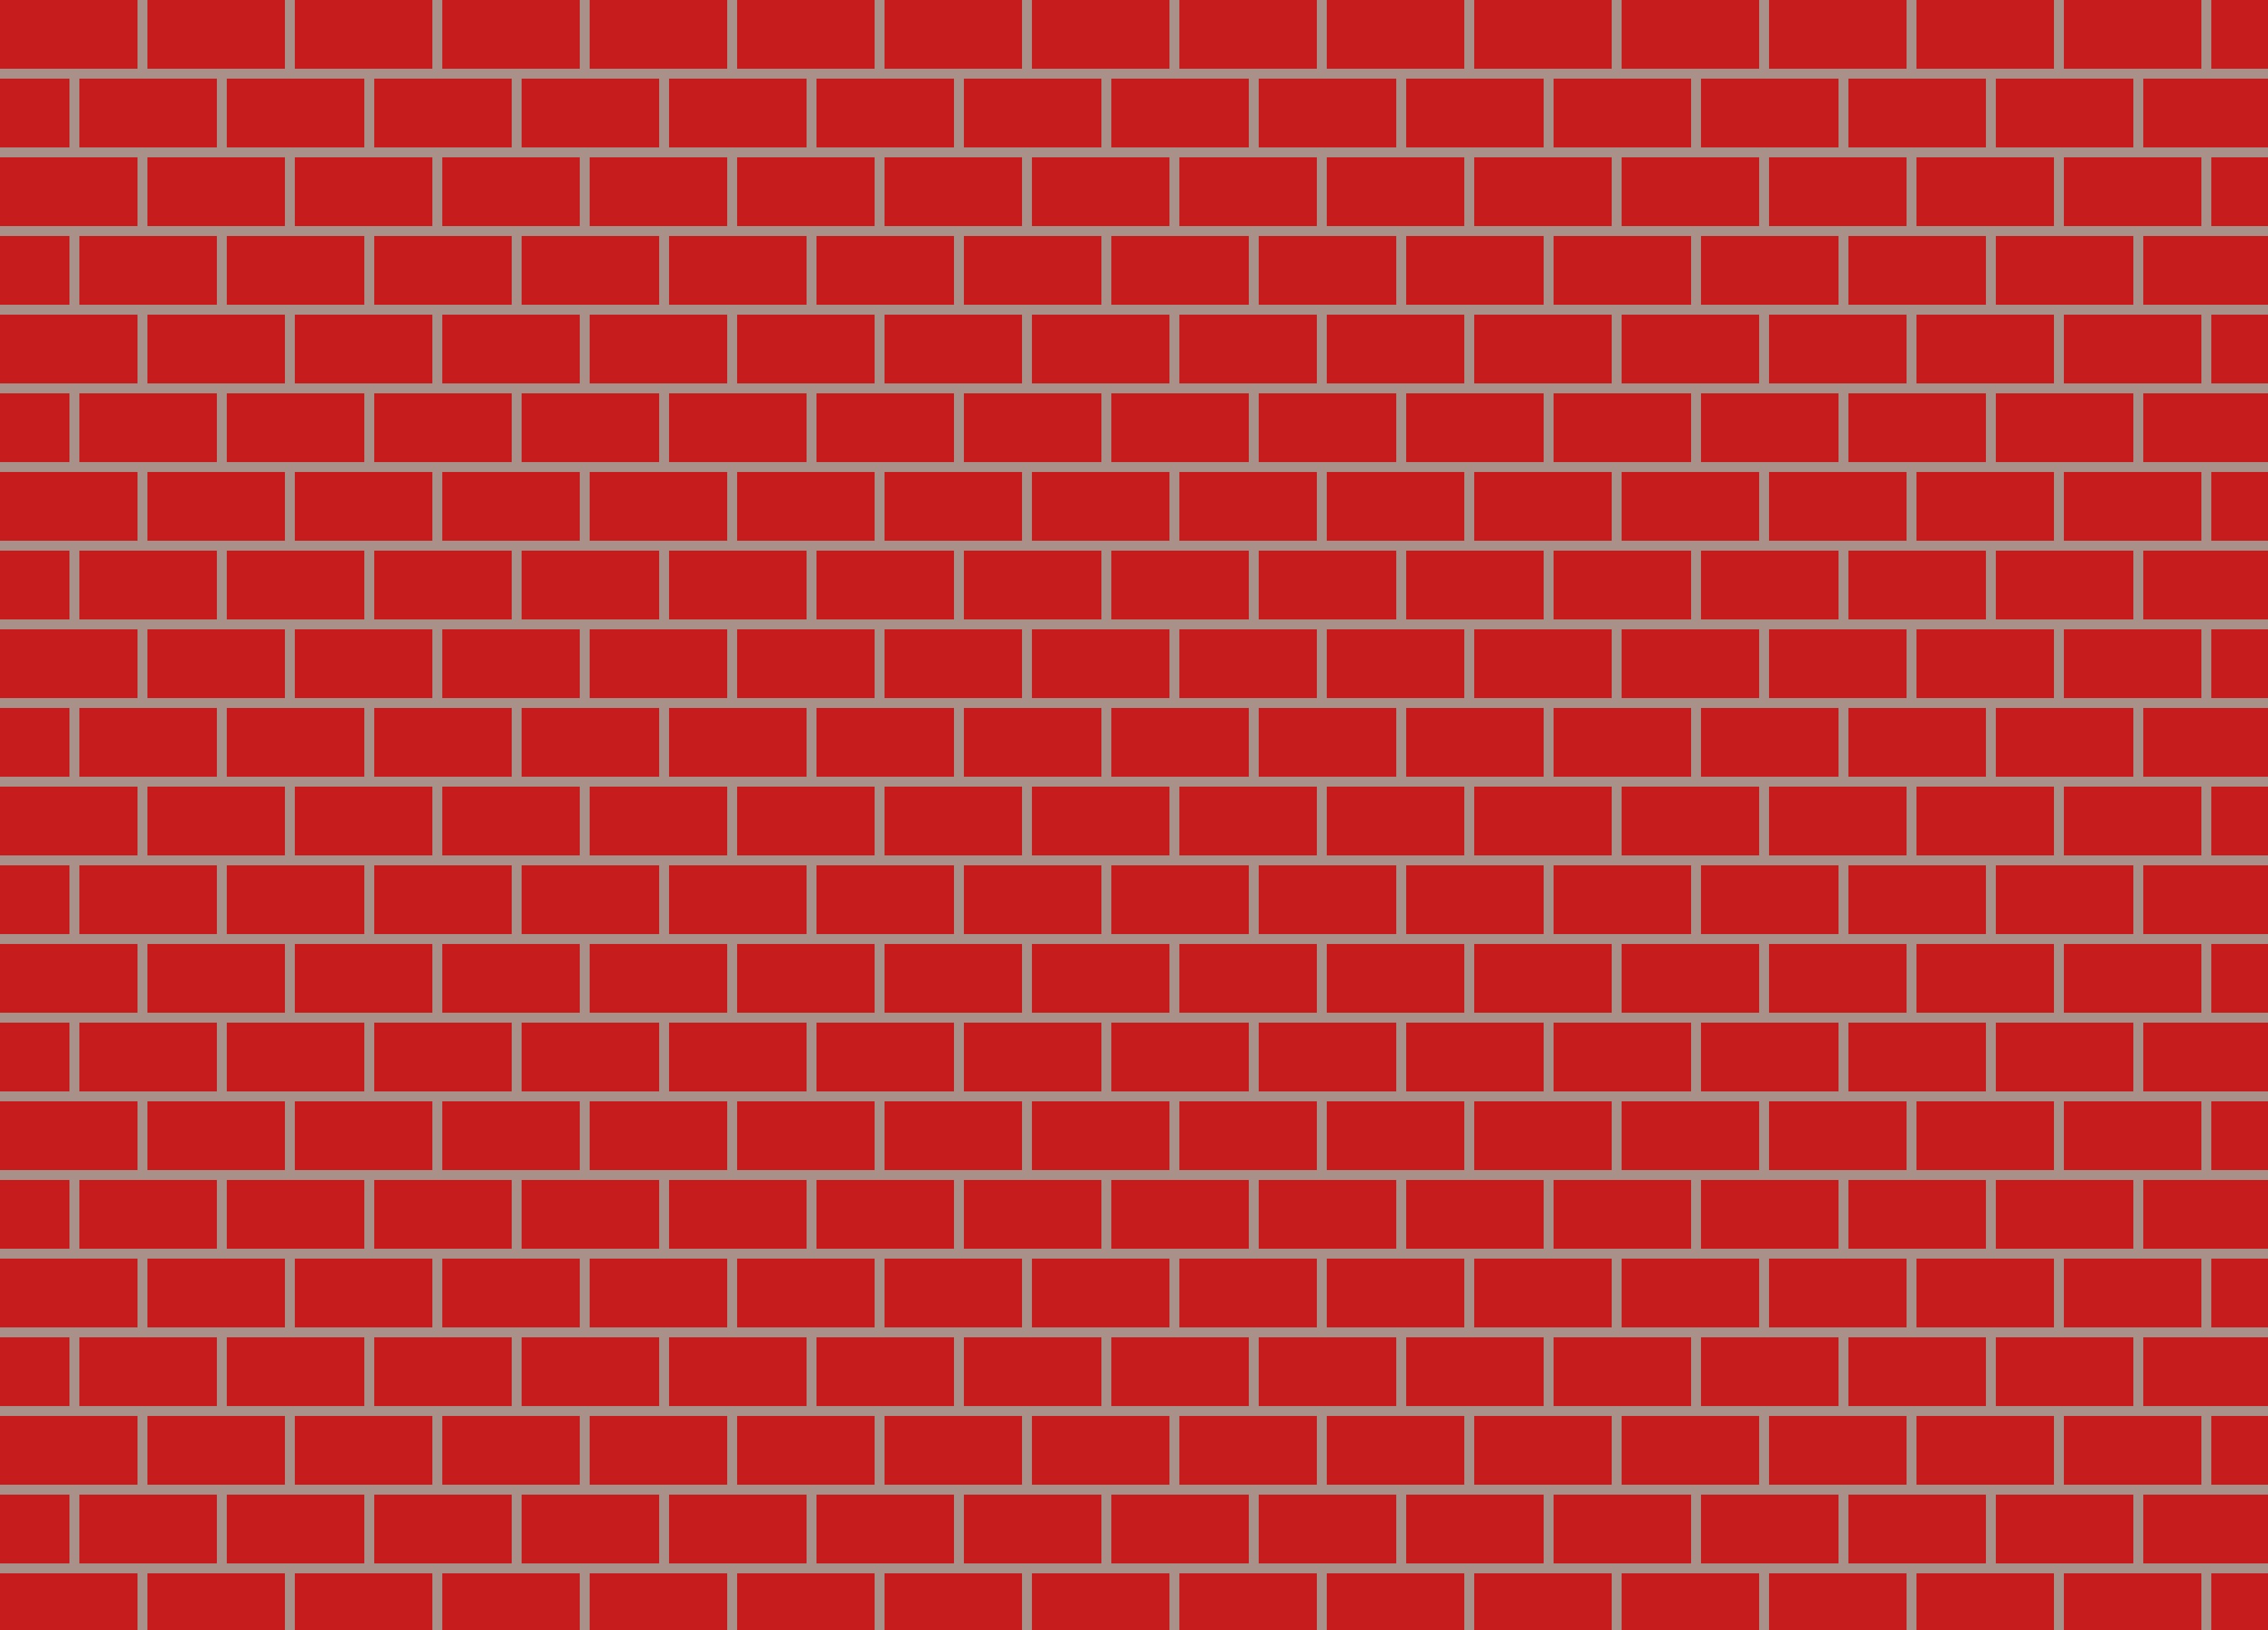 Red brick wall free image download